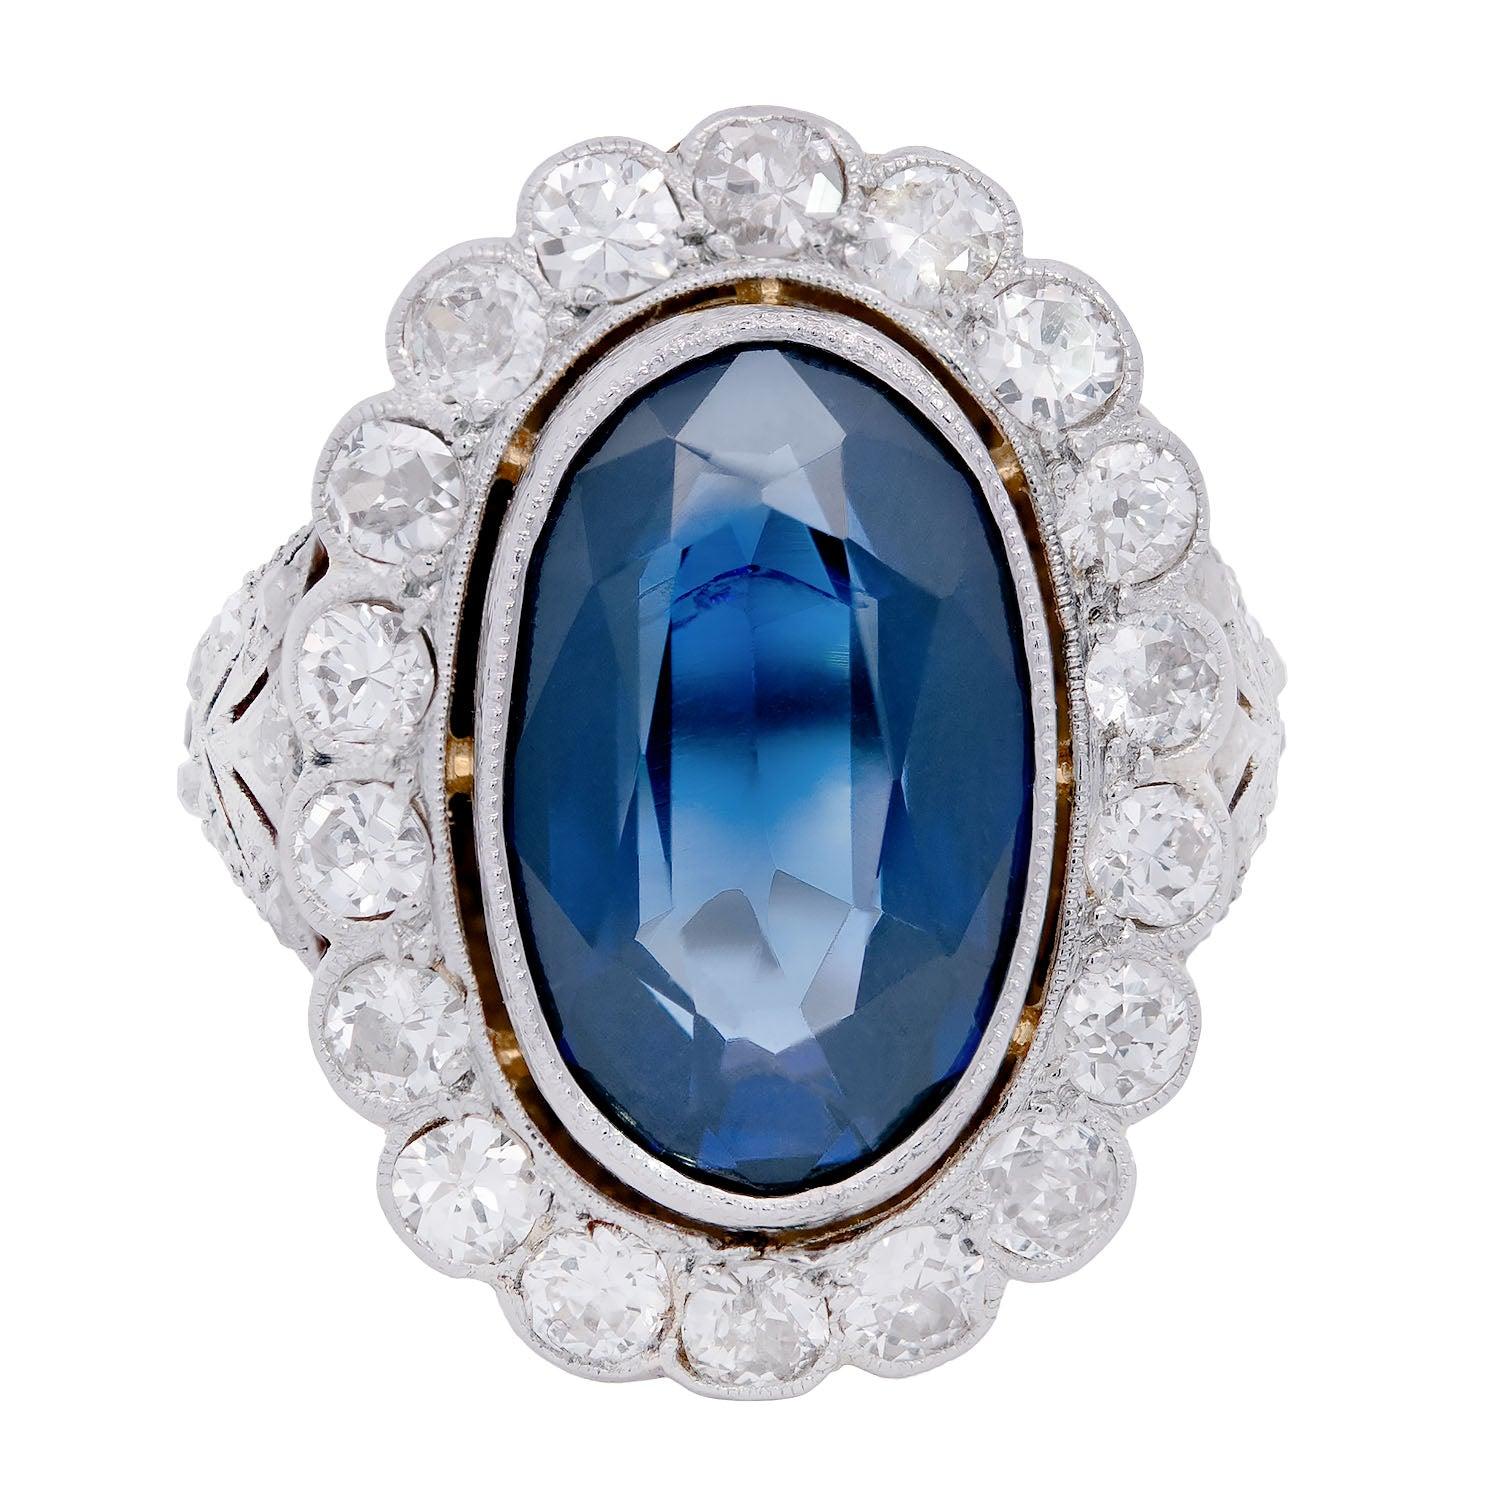 A breathtaking sapphire and diamond ring from the Edwardian (ca1910) era! This gorgeous ring features an estimated 7.50ctw sapphire at the center of a beautiful platinum and diamond mounting within a milgrained bezel. Surrounding the sapphire is a